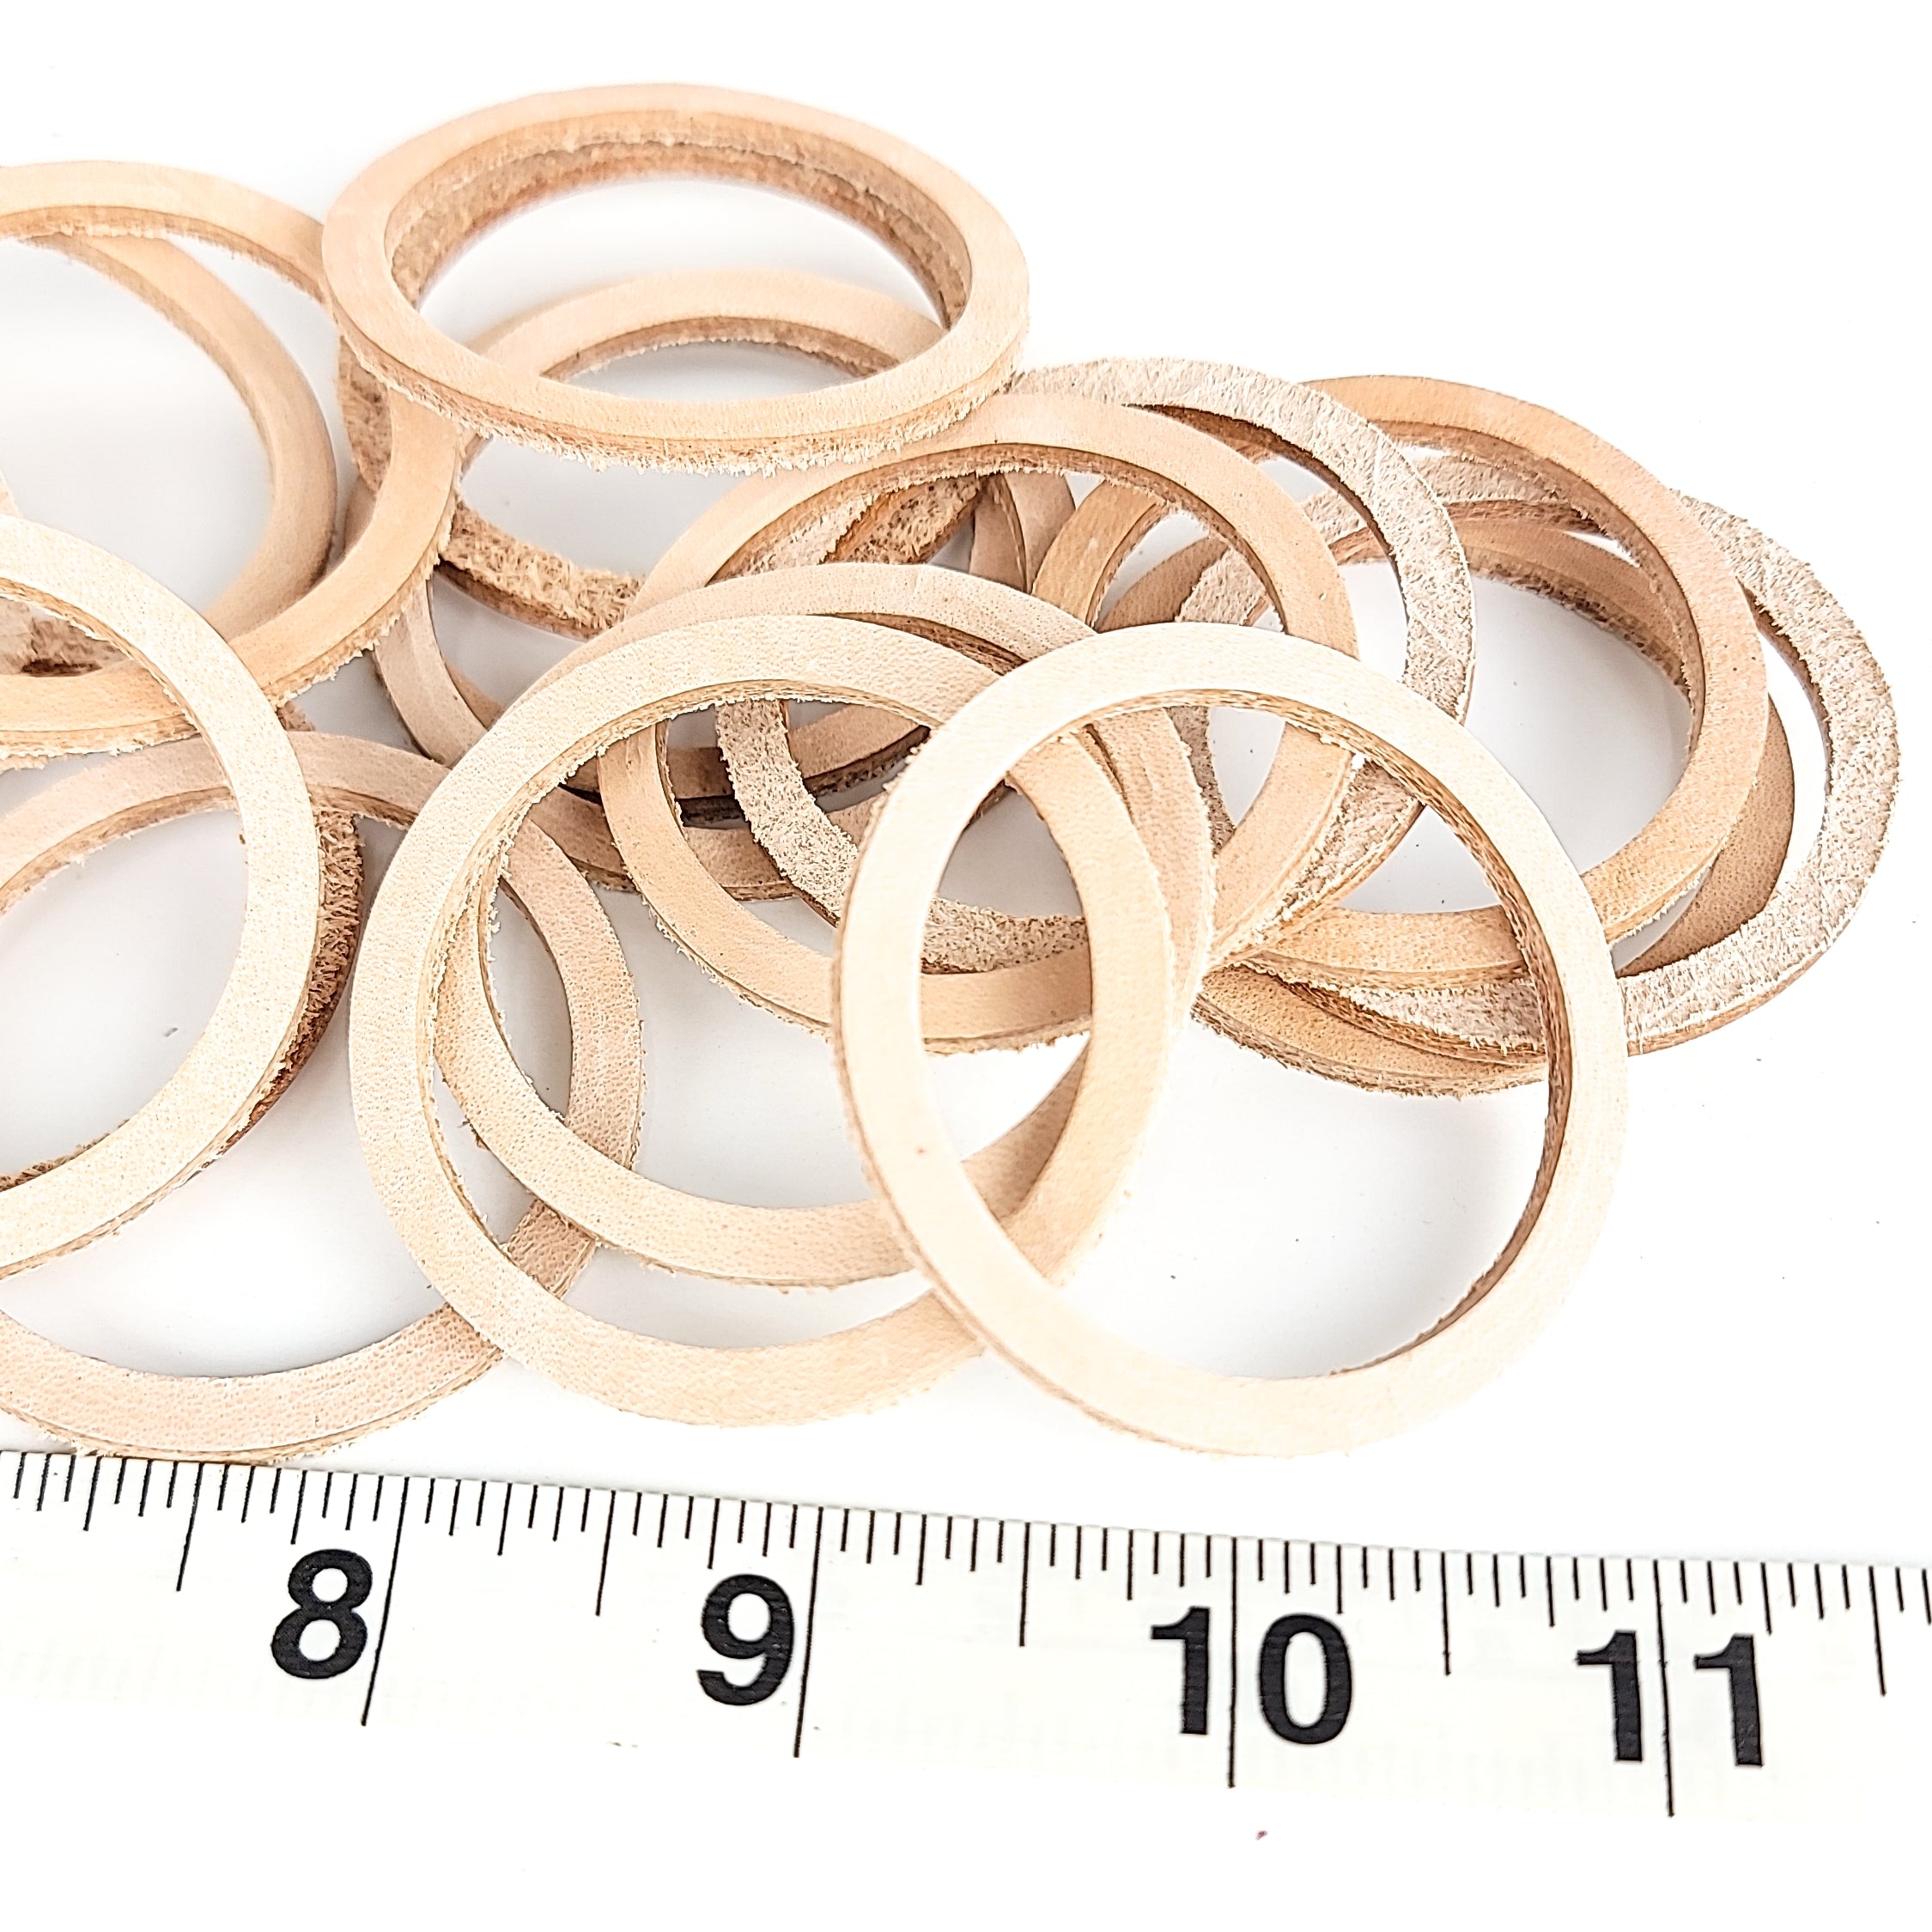 Skinny Leather Washers - 10 Pack